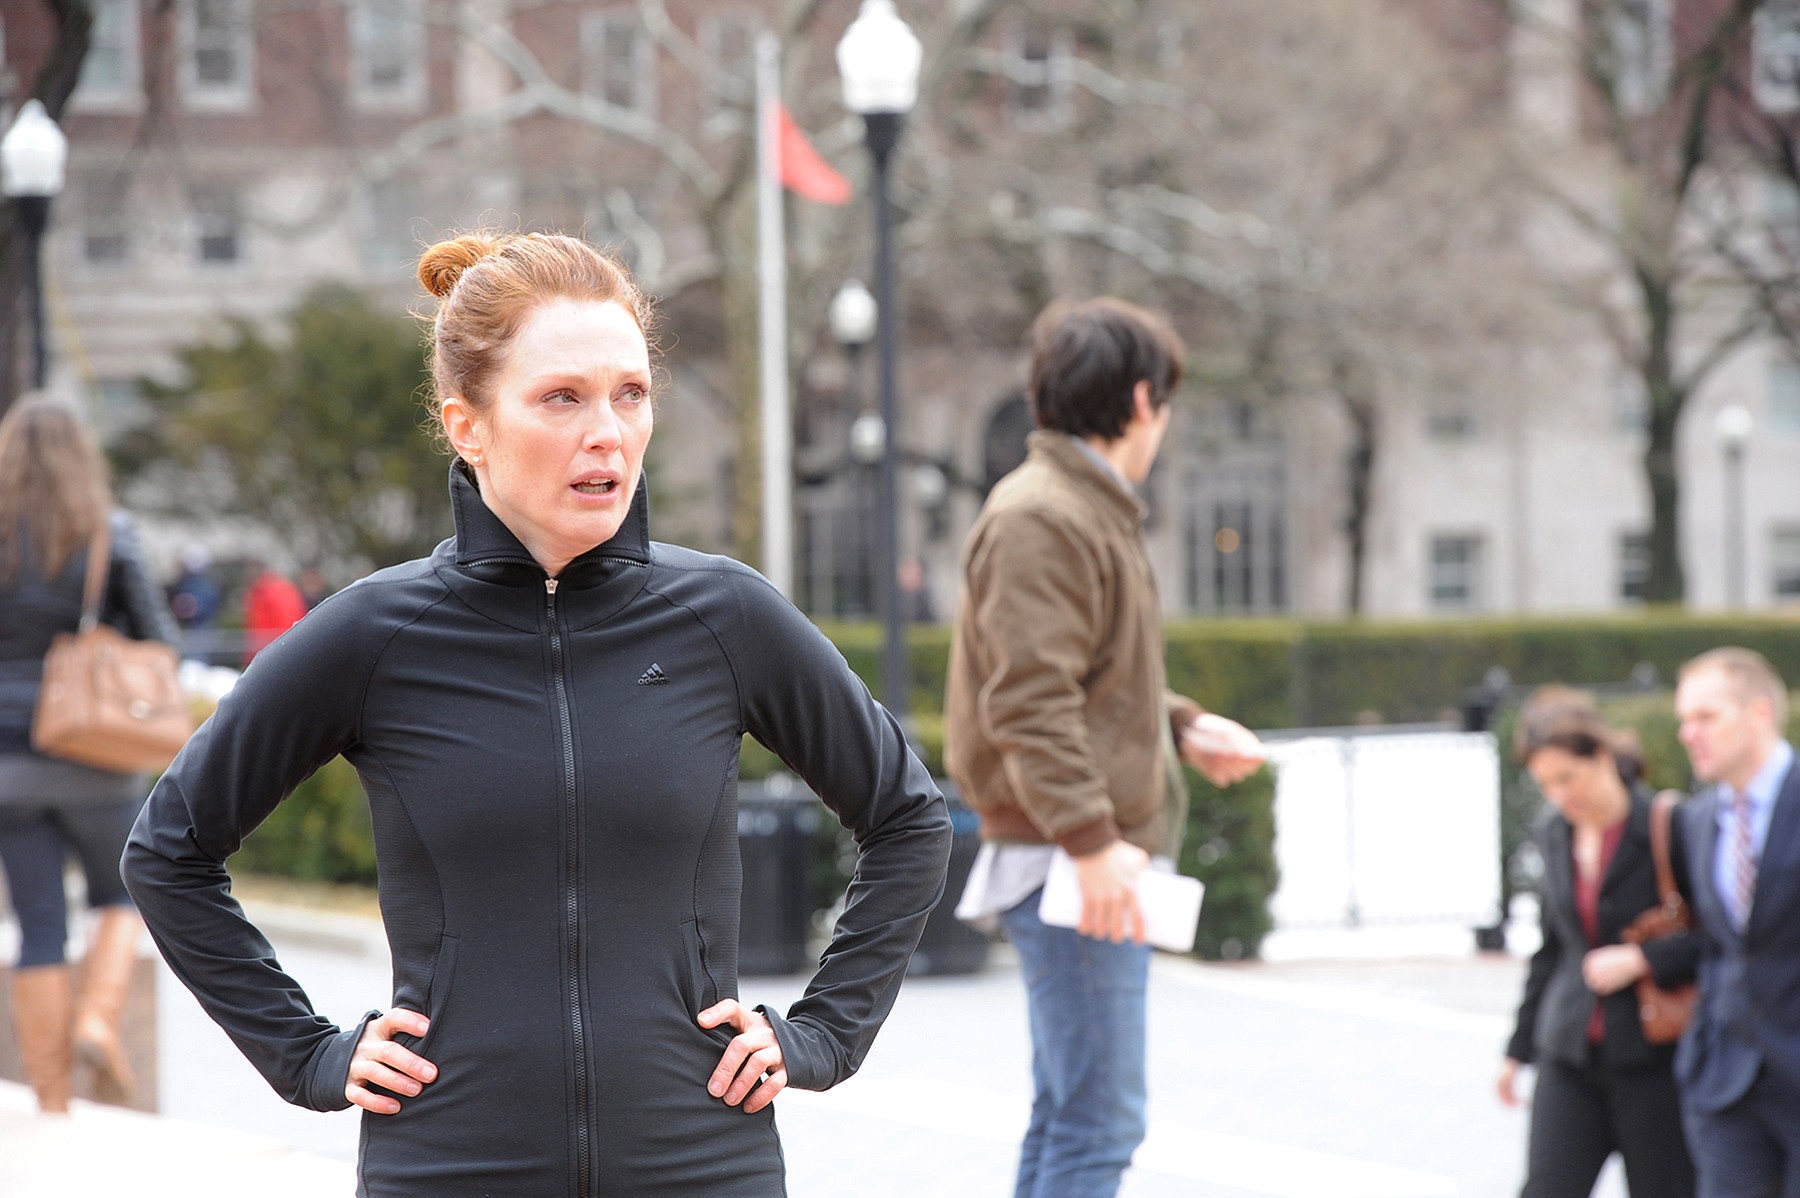 Jojo Whilden/Sony Pictures Classics
Julianne Moore grapples with early onset Alzheimer's in &quot;Still Alice.&quot;